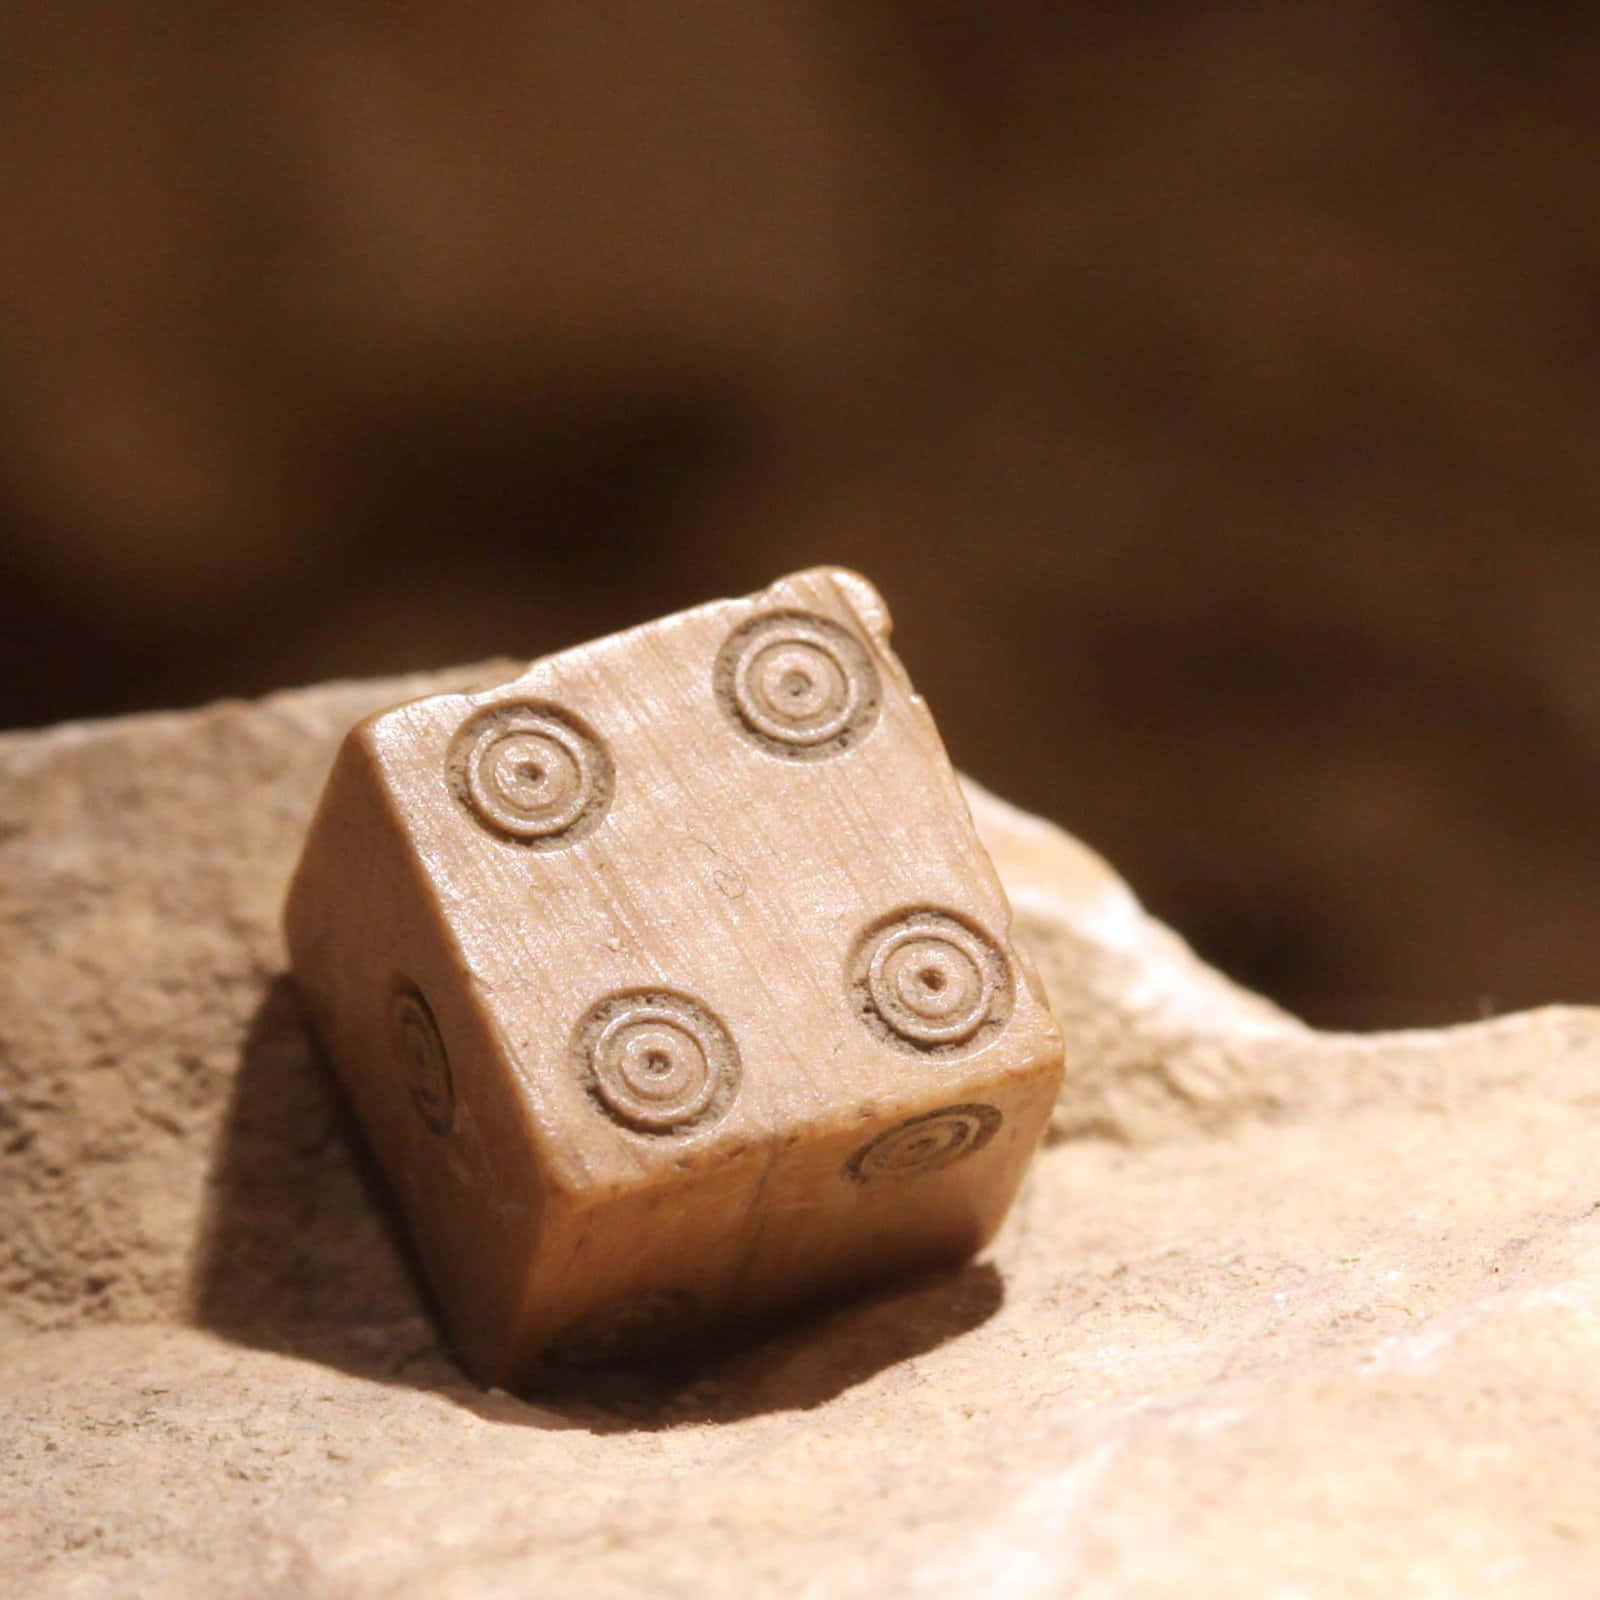 A Wooden Dice Sitting On A Rock